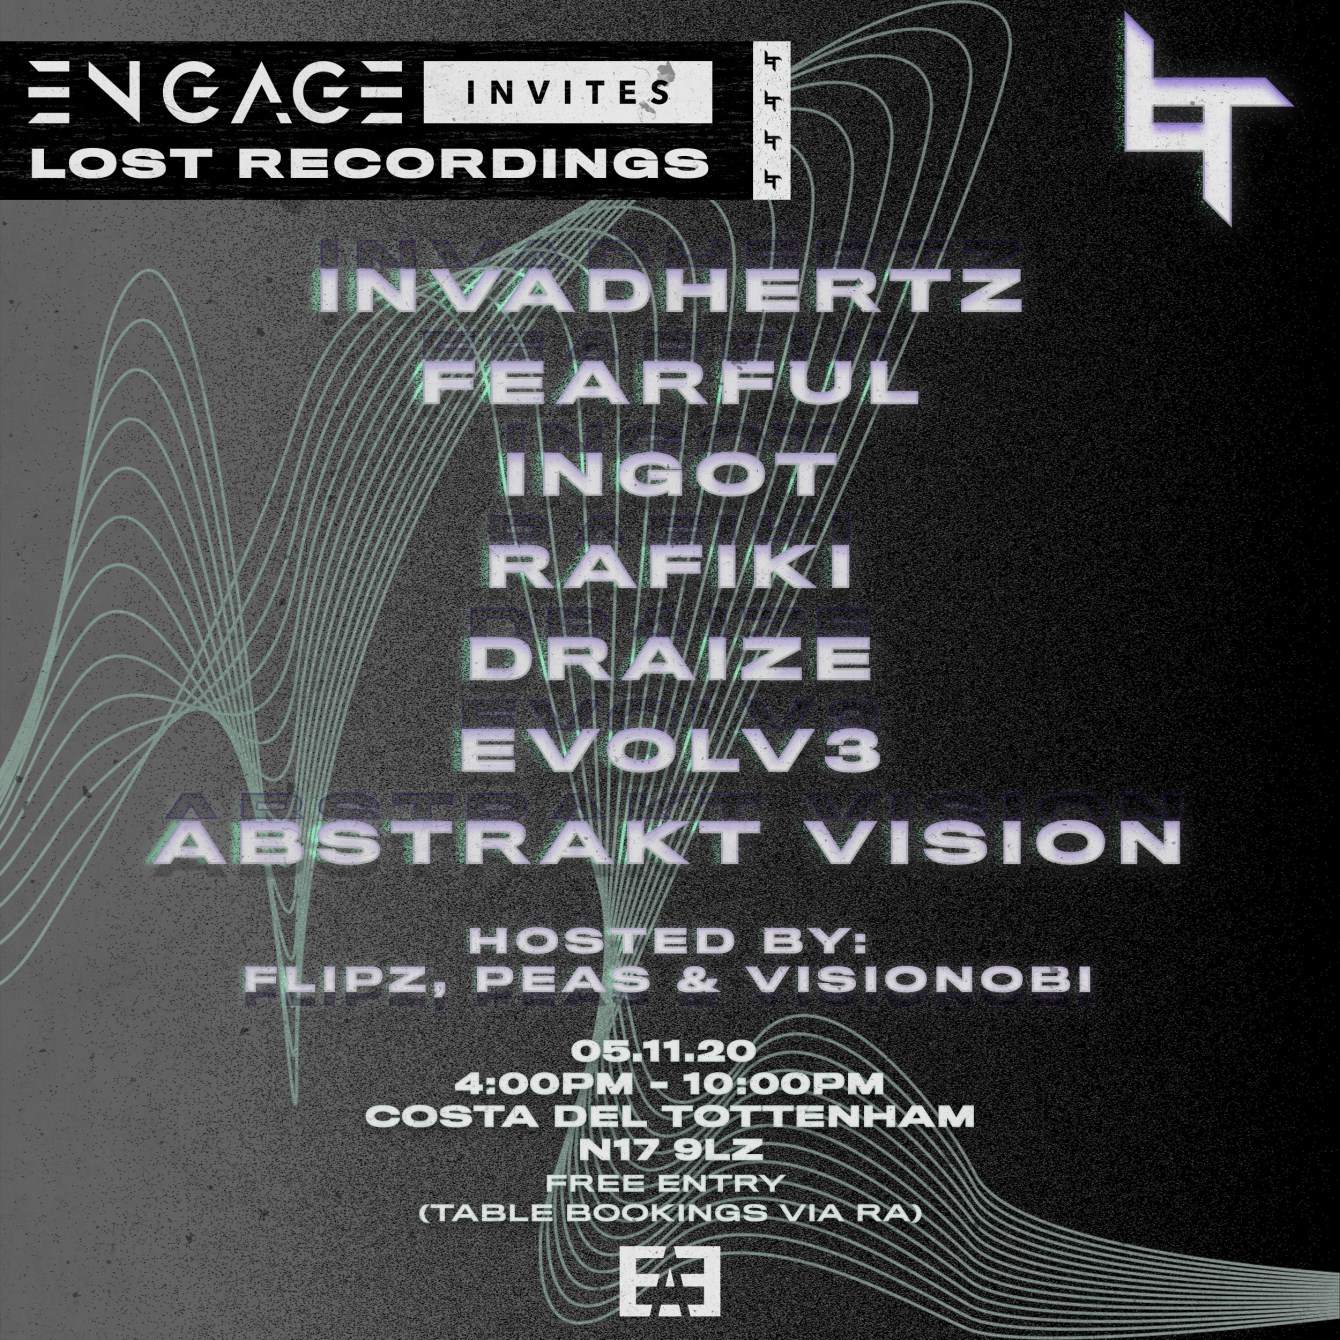 [POSTPONED] Engage Invites Lost Recordings with Invadhertz, Fearful, Ingot & More - Página frontal